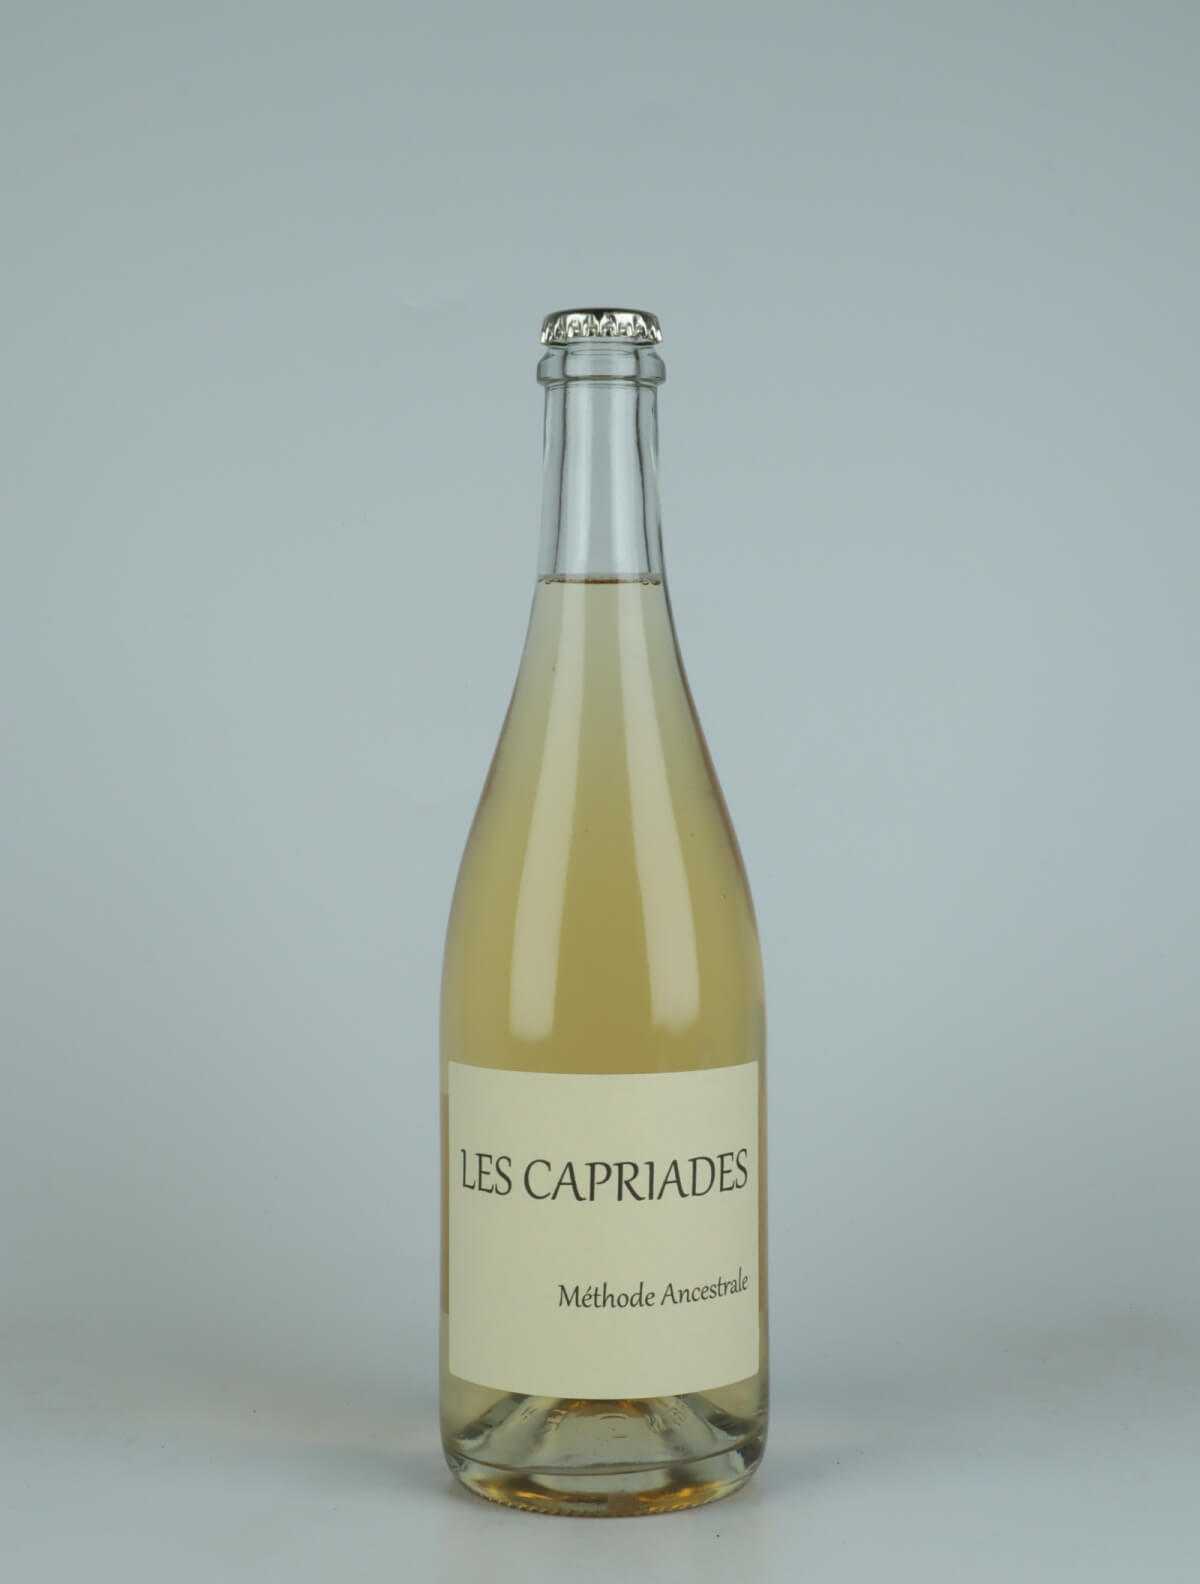 A bottle 2022 Pet'sec Sparkling from Les Capriades, Loire in France